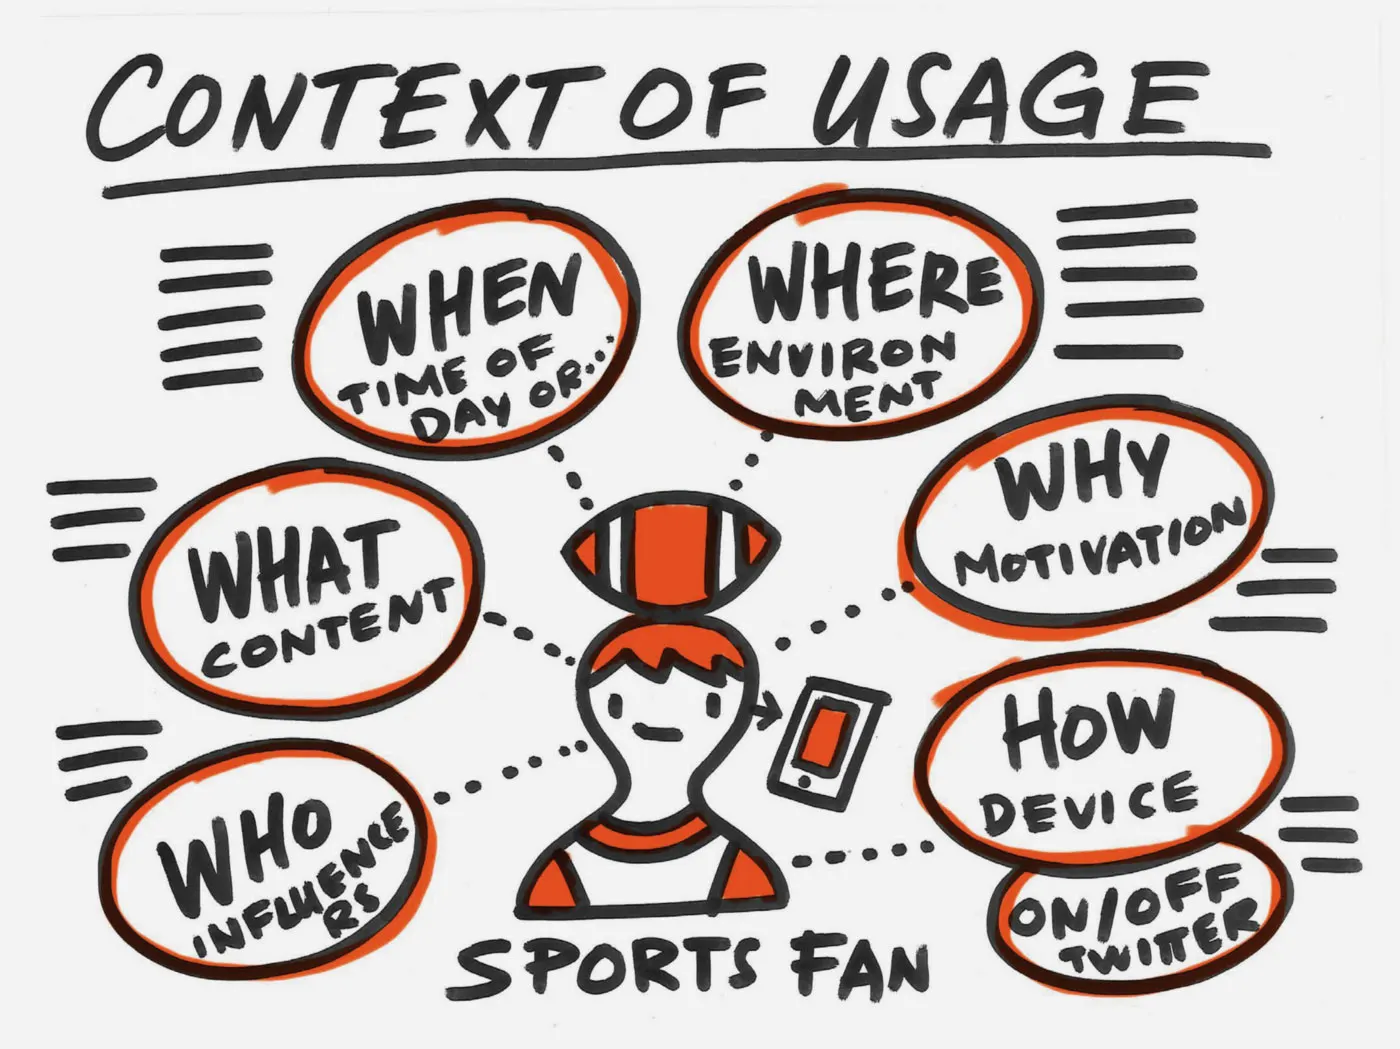 Black marker sketch with the heading "Context of Usage Sports Fan" and word pairings underneath: When (Time of day). What (Content). Who (Influencers). Where (Environment). Why (Motivation). How (Device). 